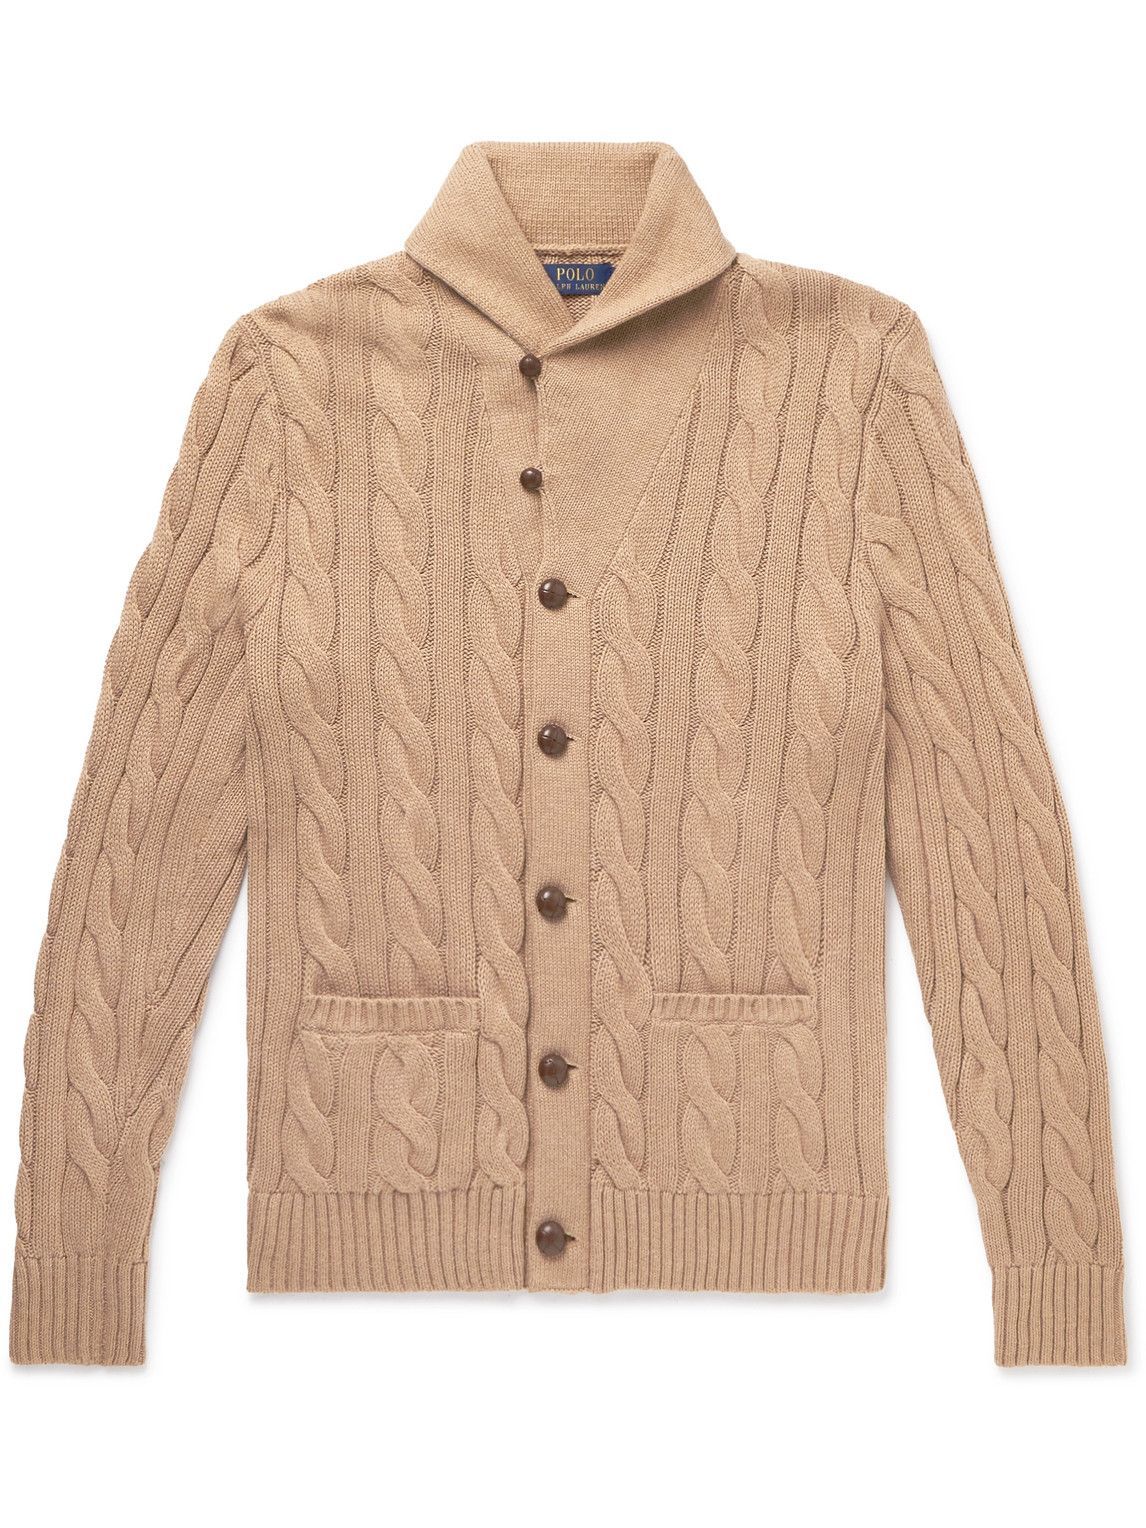 Photo: Polo Ralph Lauren - Shawl-Collar Cable-Knit Cotton and Cashmere-Blend Cardigan - Brown